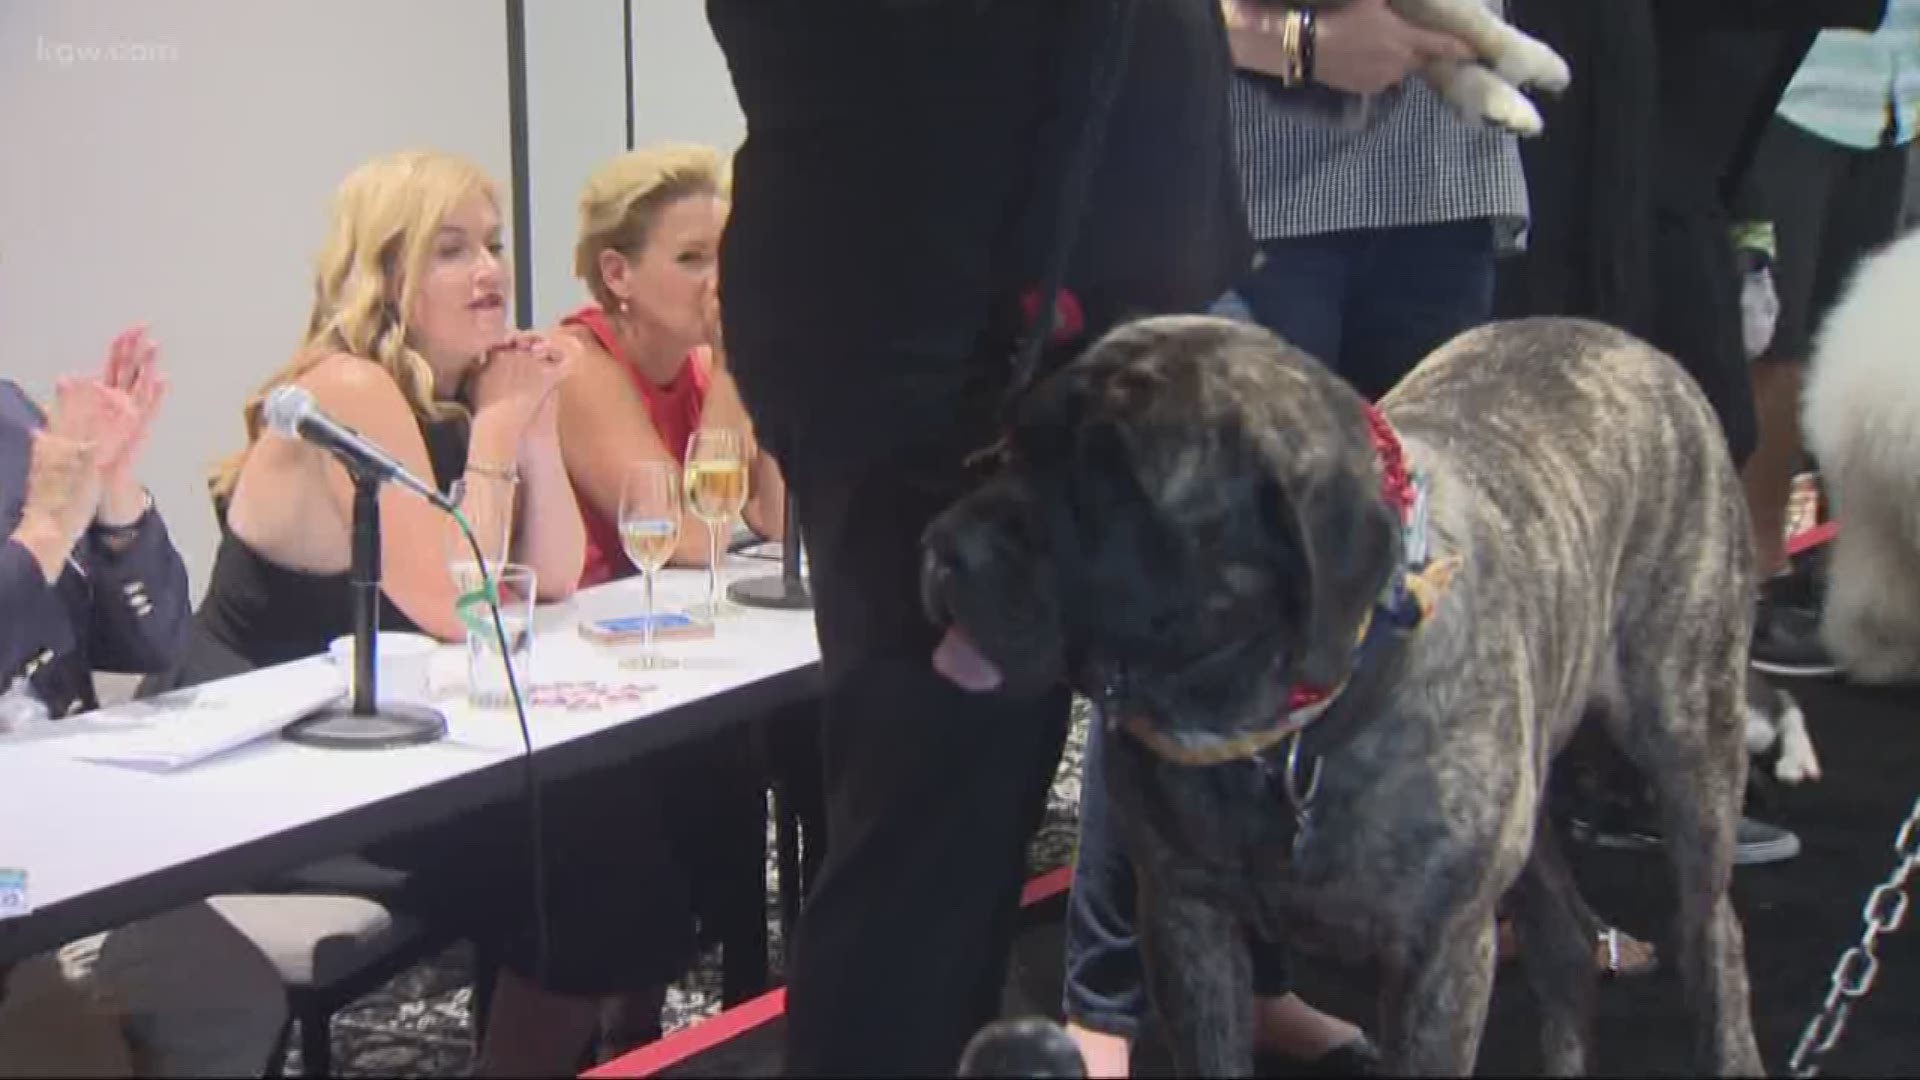 This year's grand marshal for the Grand Floral Parade will be Diesel, a 185-pound English Mastiff.